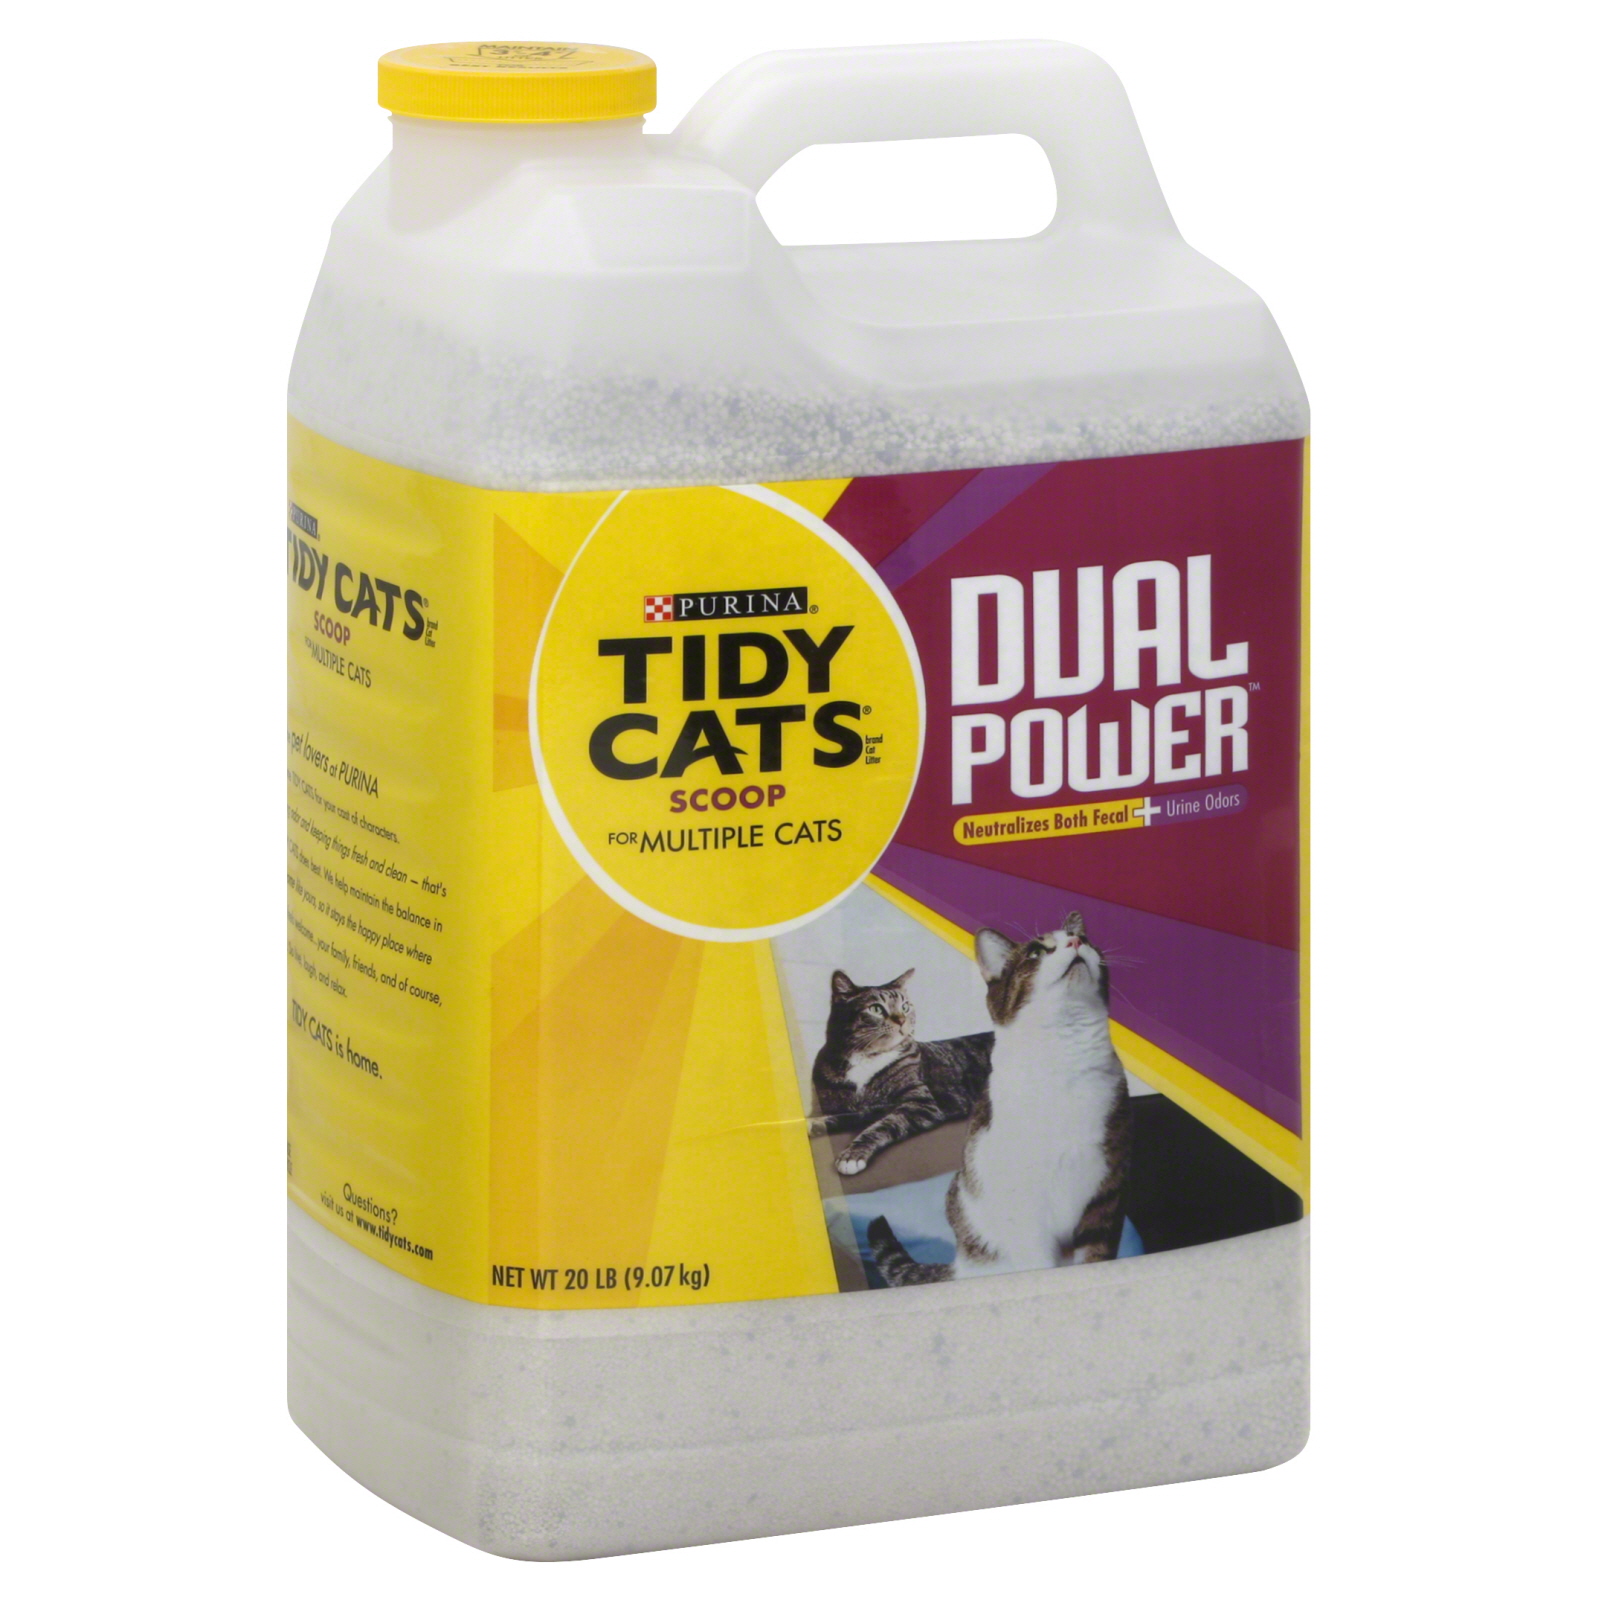 Tidy Cats Dual Power for Multiple Cats Scoopable Litter, 20 lb. Jug